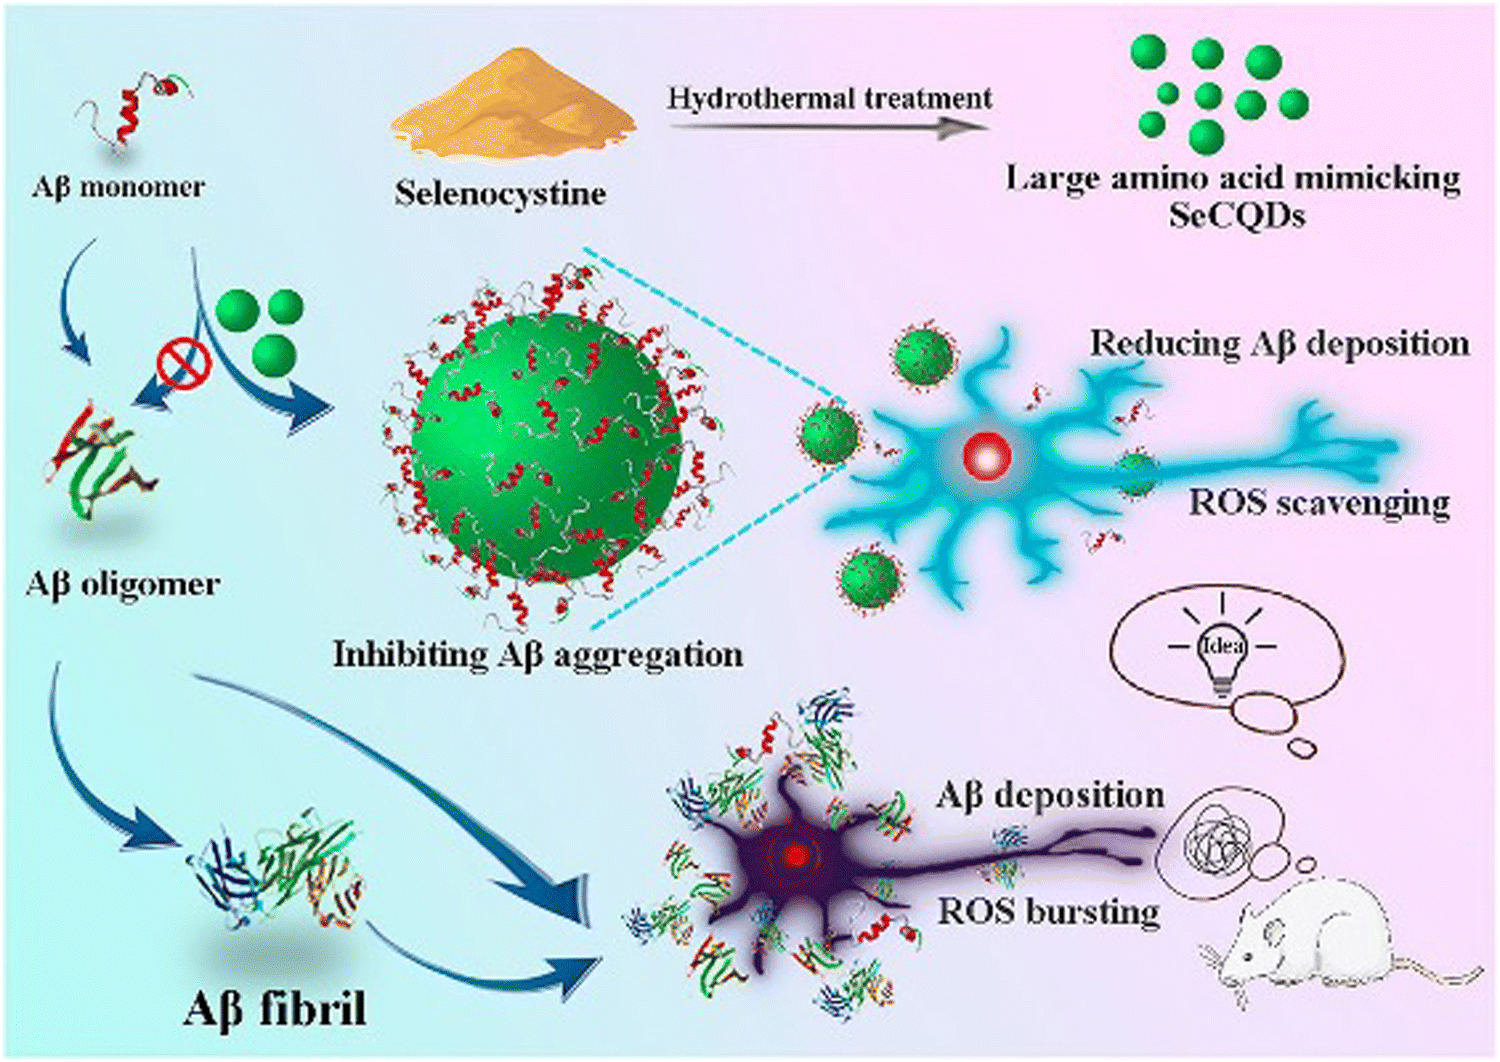 Design and fabrication of intracellular therapeutic cargo delivery systems  based on nanomaterials: current status and future perspectives - Journal of  Materials Chemistry B (RSC Publishing) DOI:10.1039/D3TB01008B